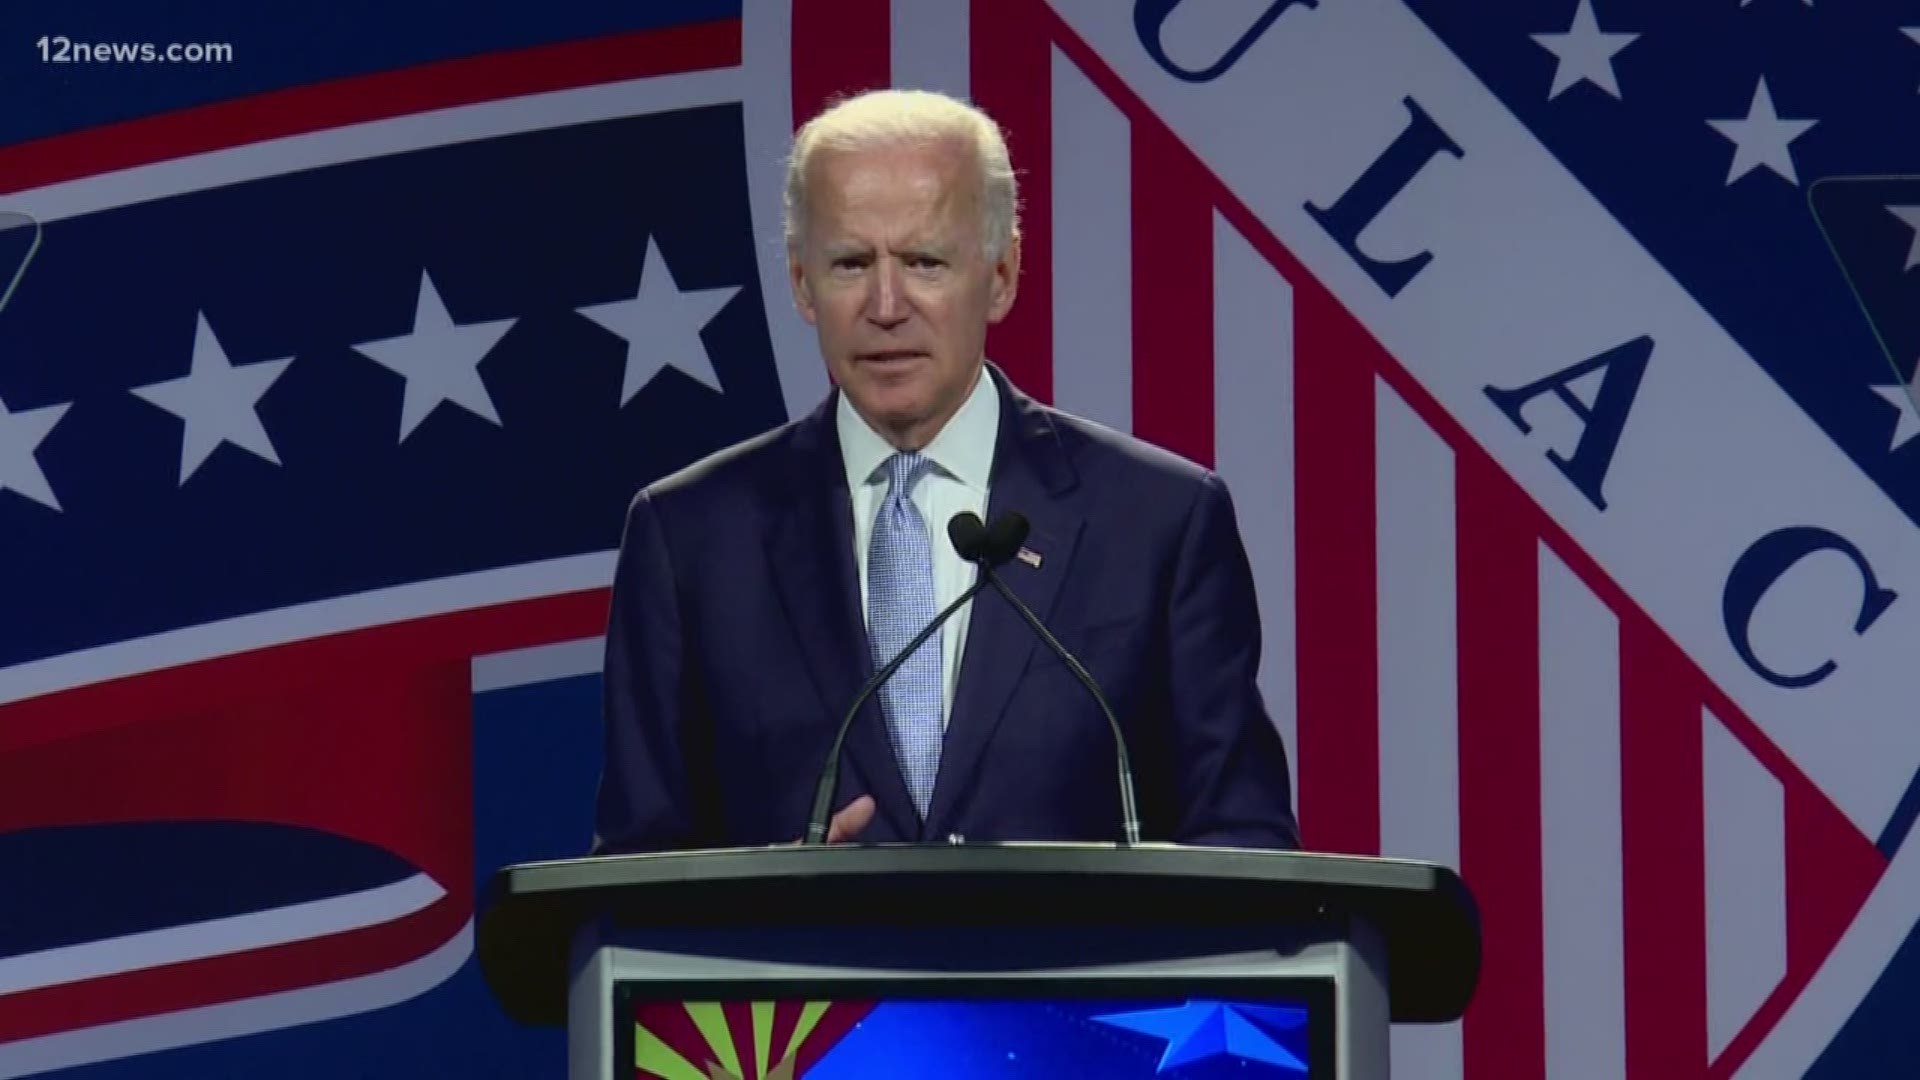 Biden talked about the impact of the Trump Administration's get-tough policies on the border and urged Latinos to vote in 2018.